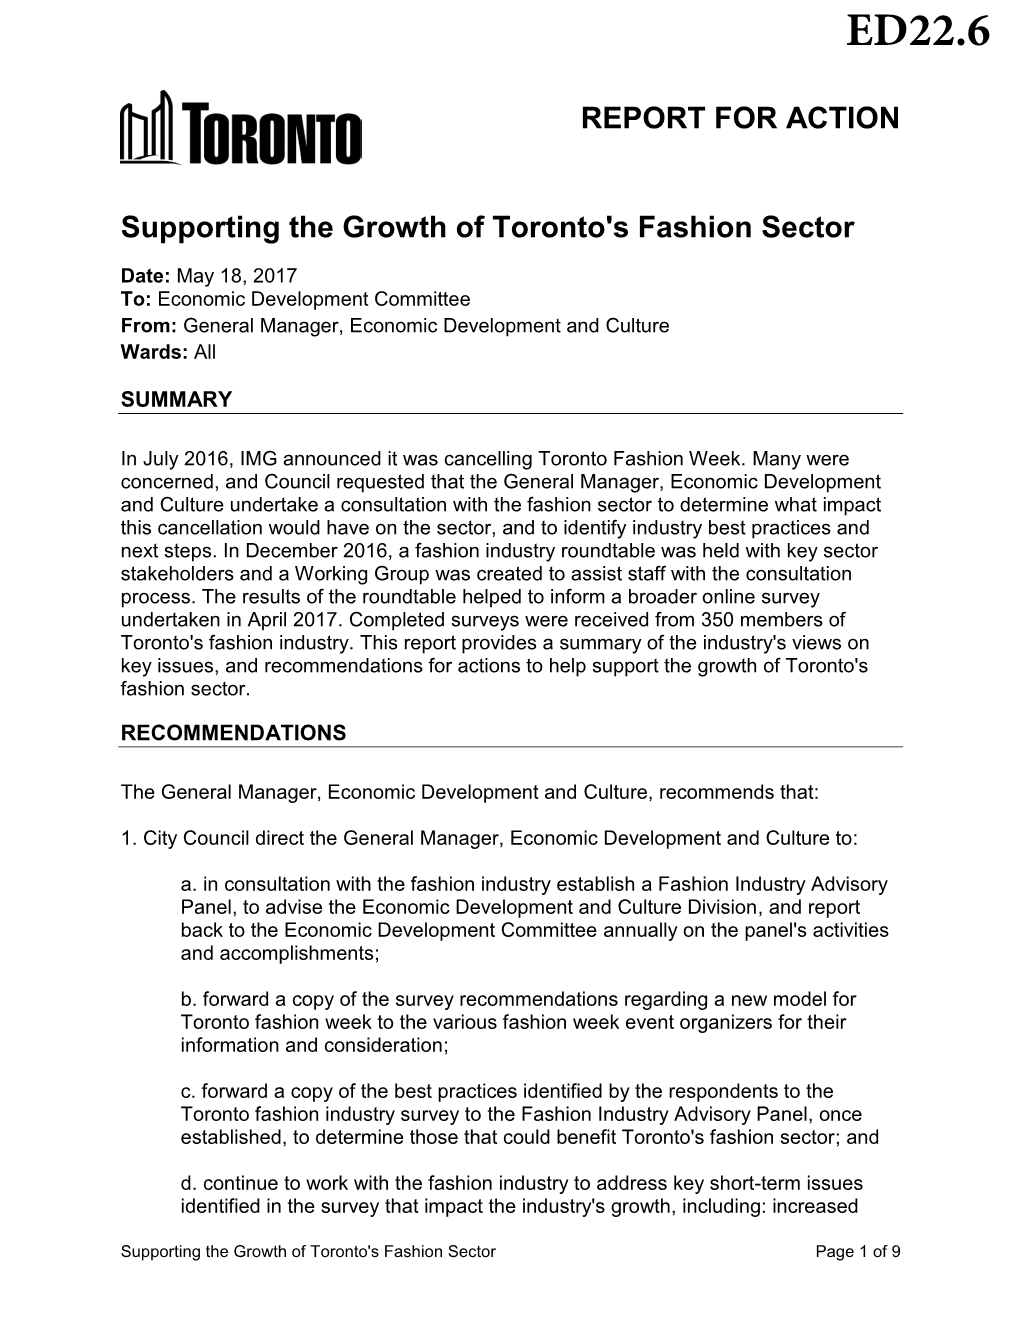 REPORT for ACTION Supporting the Growth of Toronto's Fashion Sector